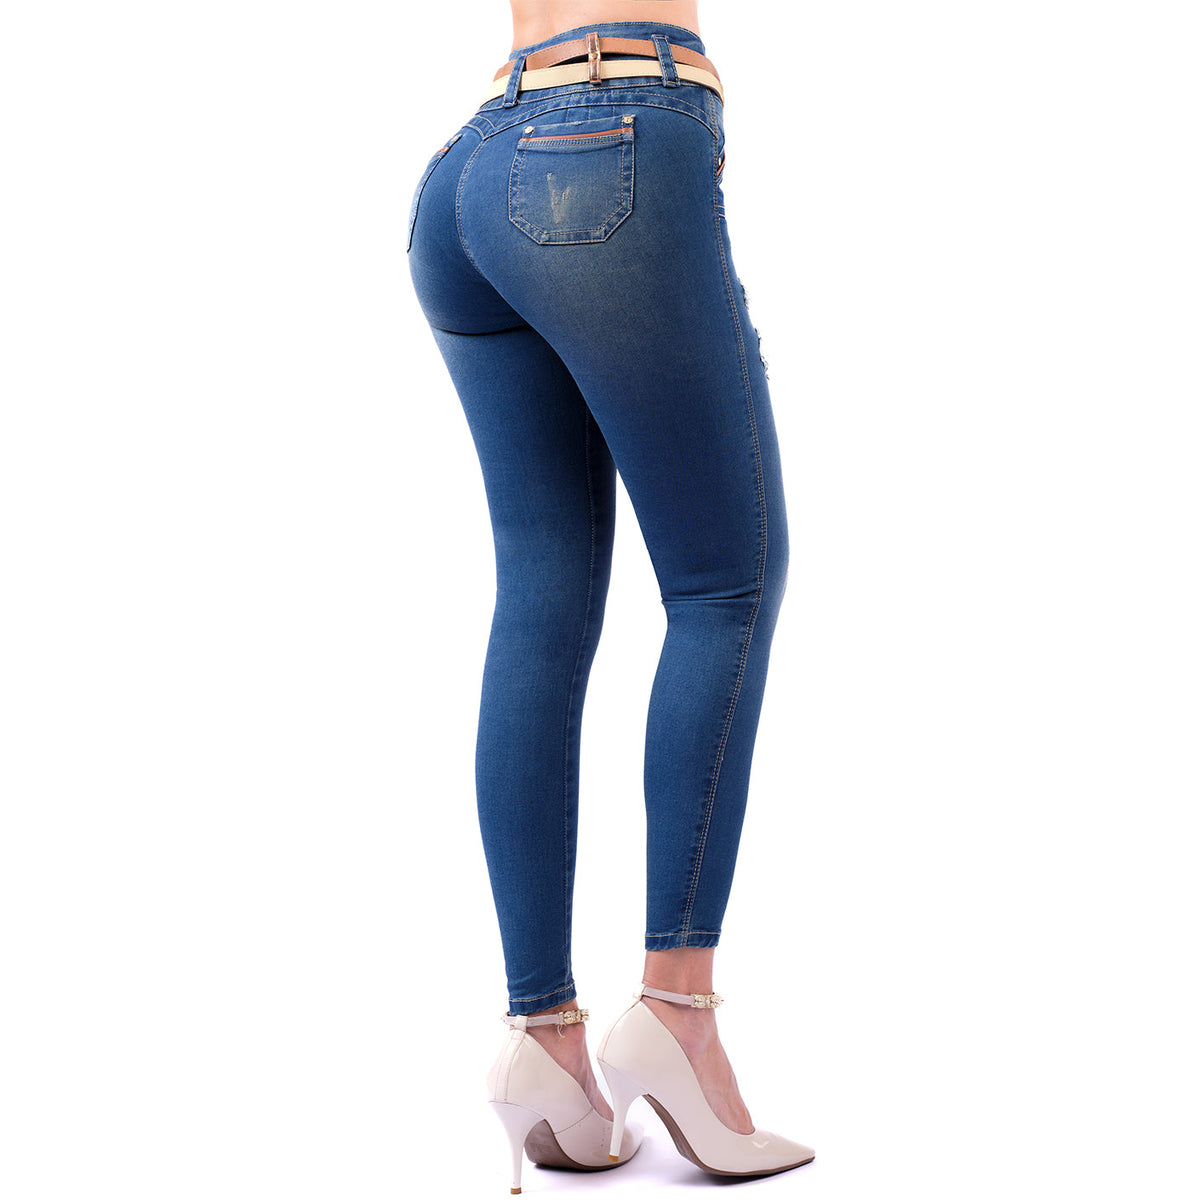 Begree Jeans Authentic Buttlifting From Moda Colombia Size 11